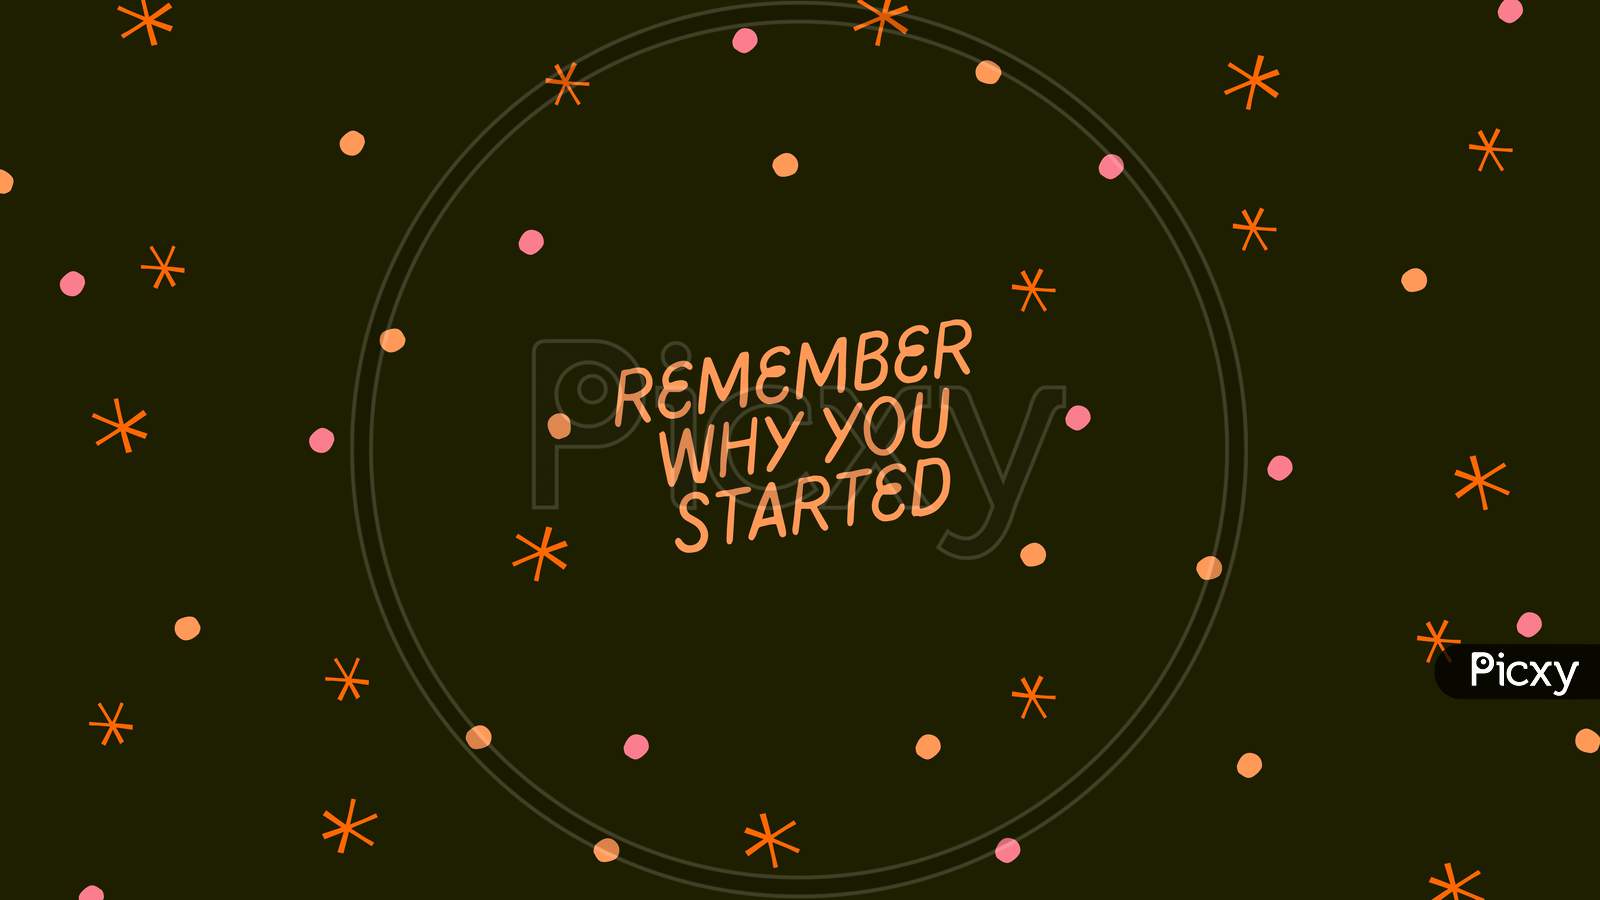 Image Of Colorful Dots Organic Typography Desktop Wallpaper Remember Why You Started (Motivational Poster) BG588550 Picxy